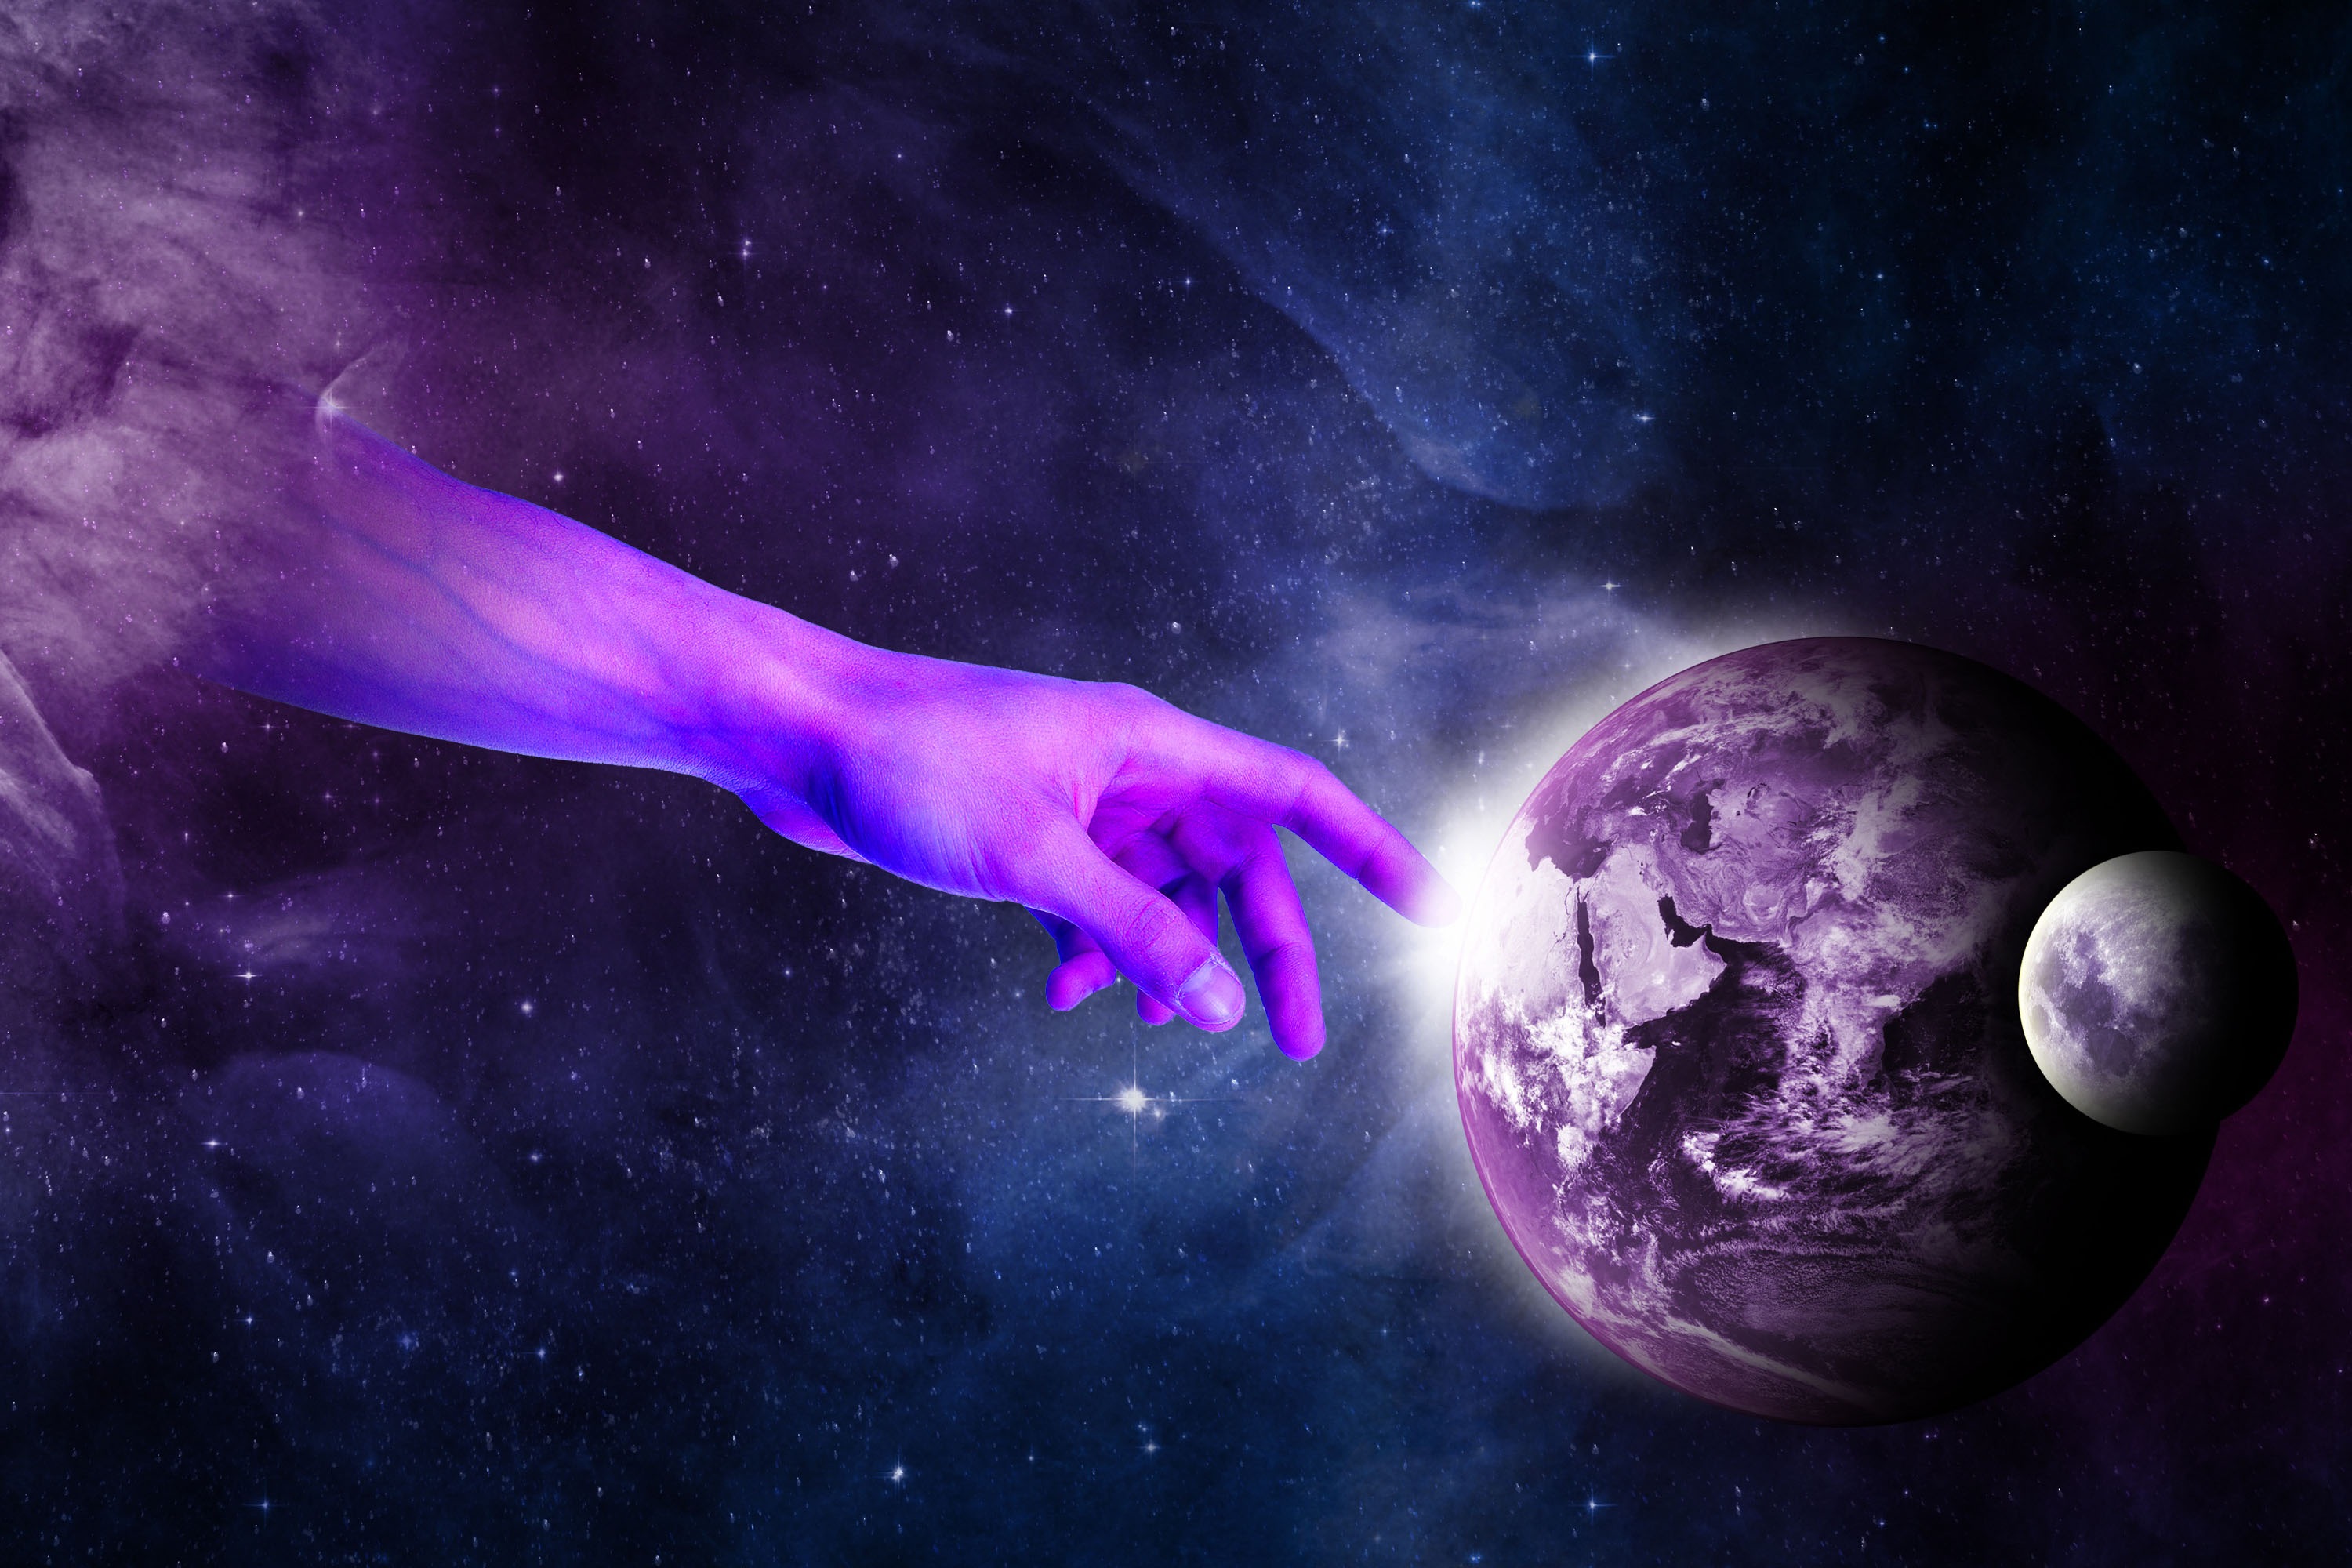 blueish purple and black and white image, hand of God reaching Earth white sparks where touching.  The moon is also near the Earth